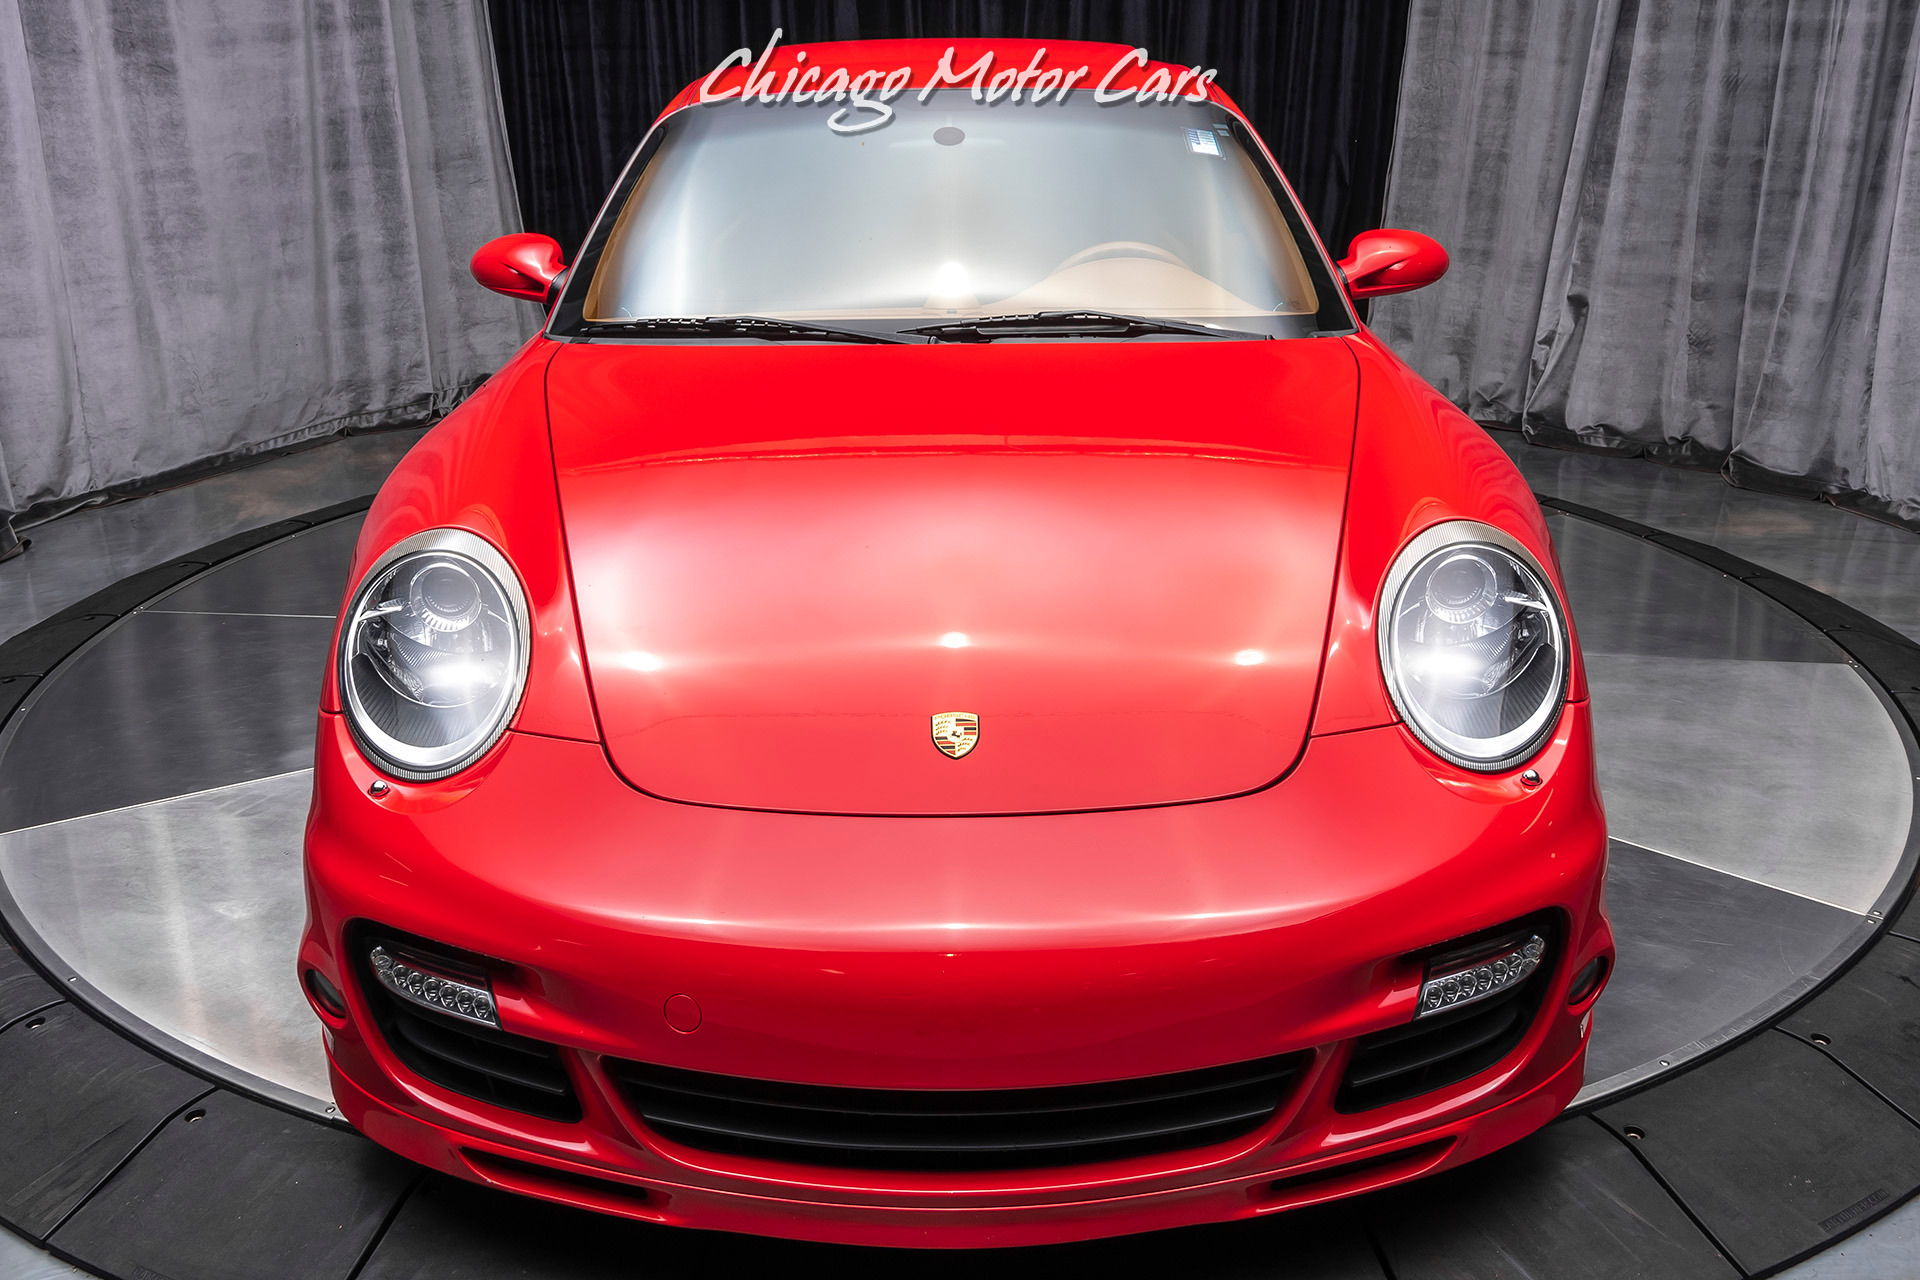 Used-2008-Porsche-911-Turbo-Coupe-MSRP-141K-SPORT-CHRONO-PACKAGE-Tiptronic